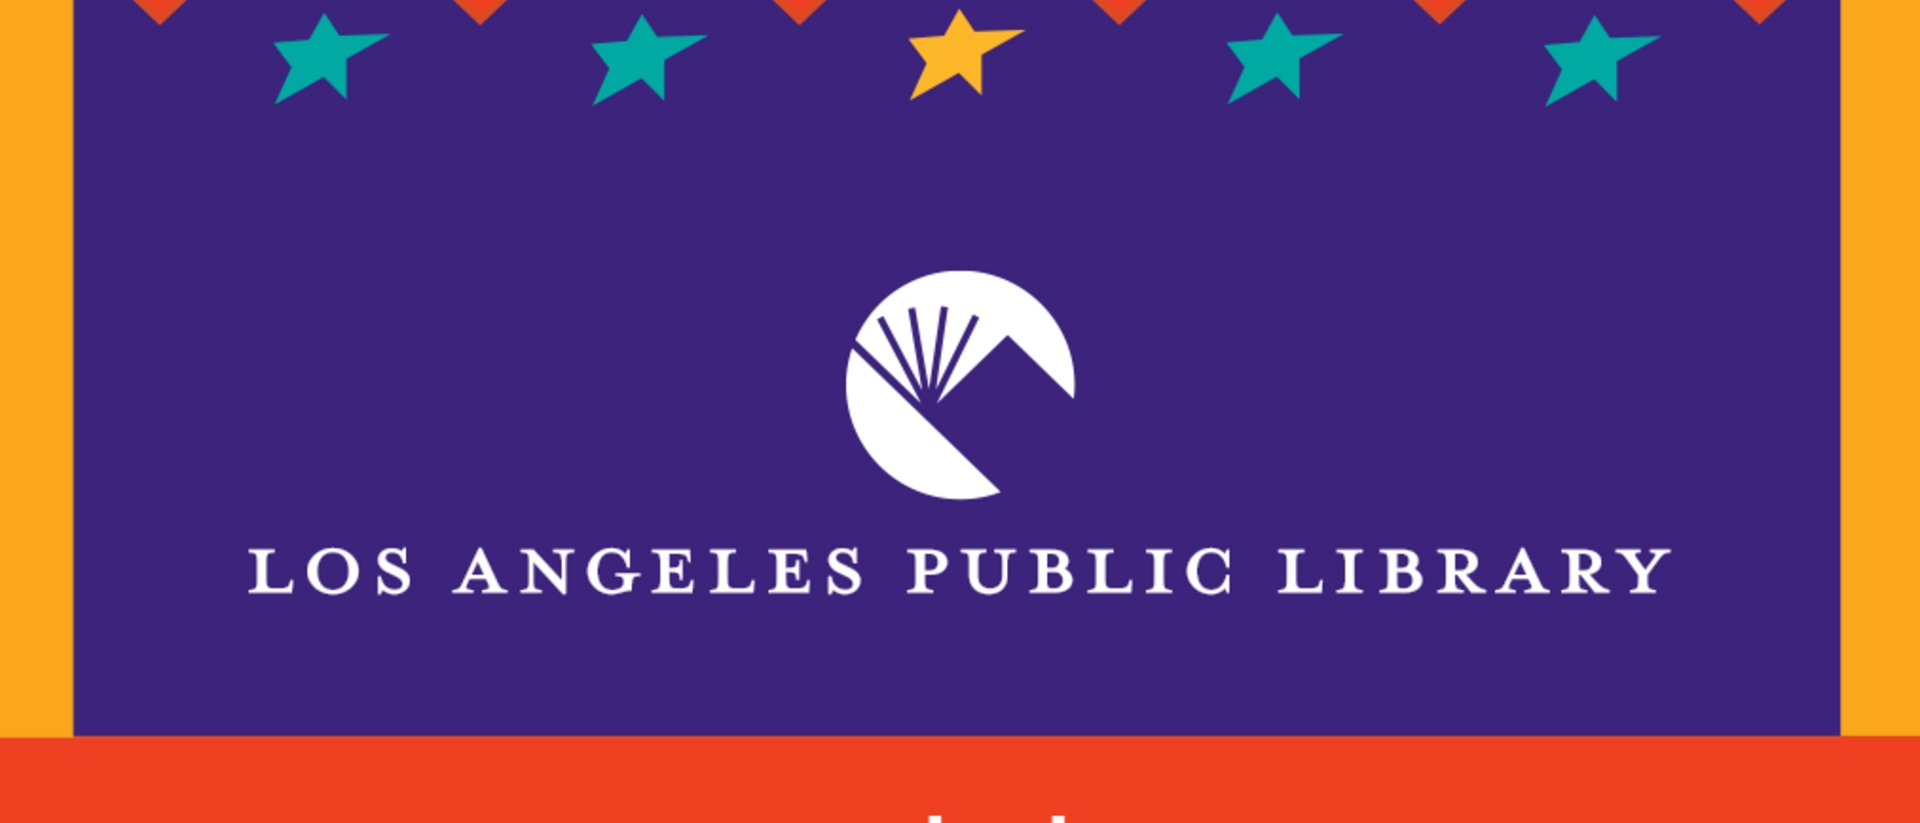 the Los Angeles Public Library